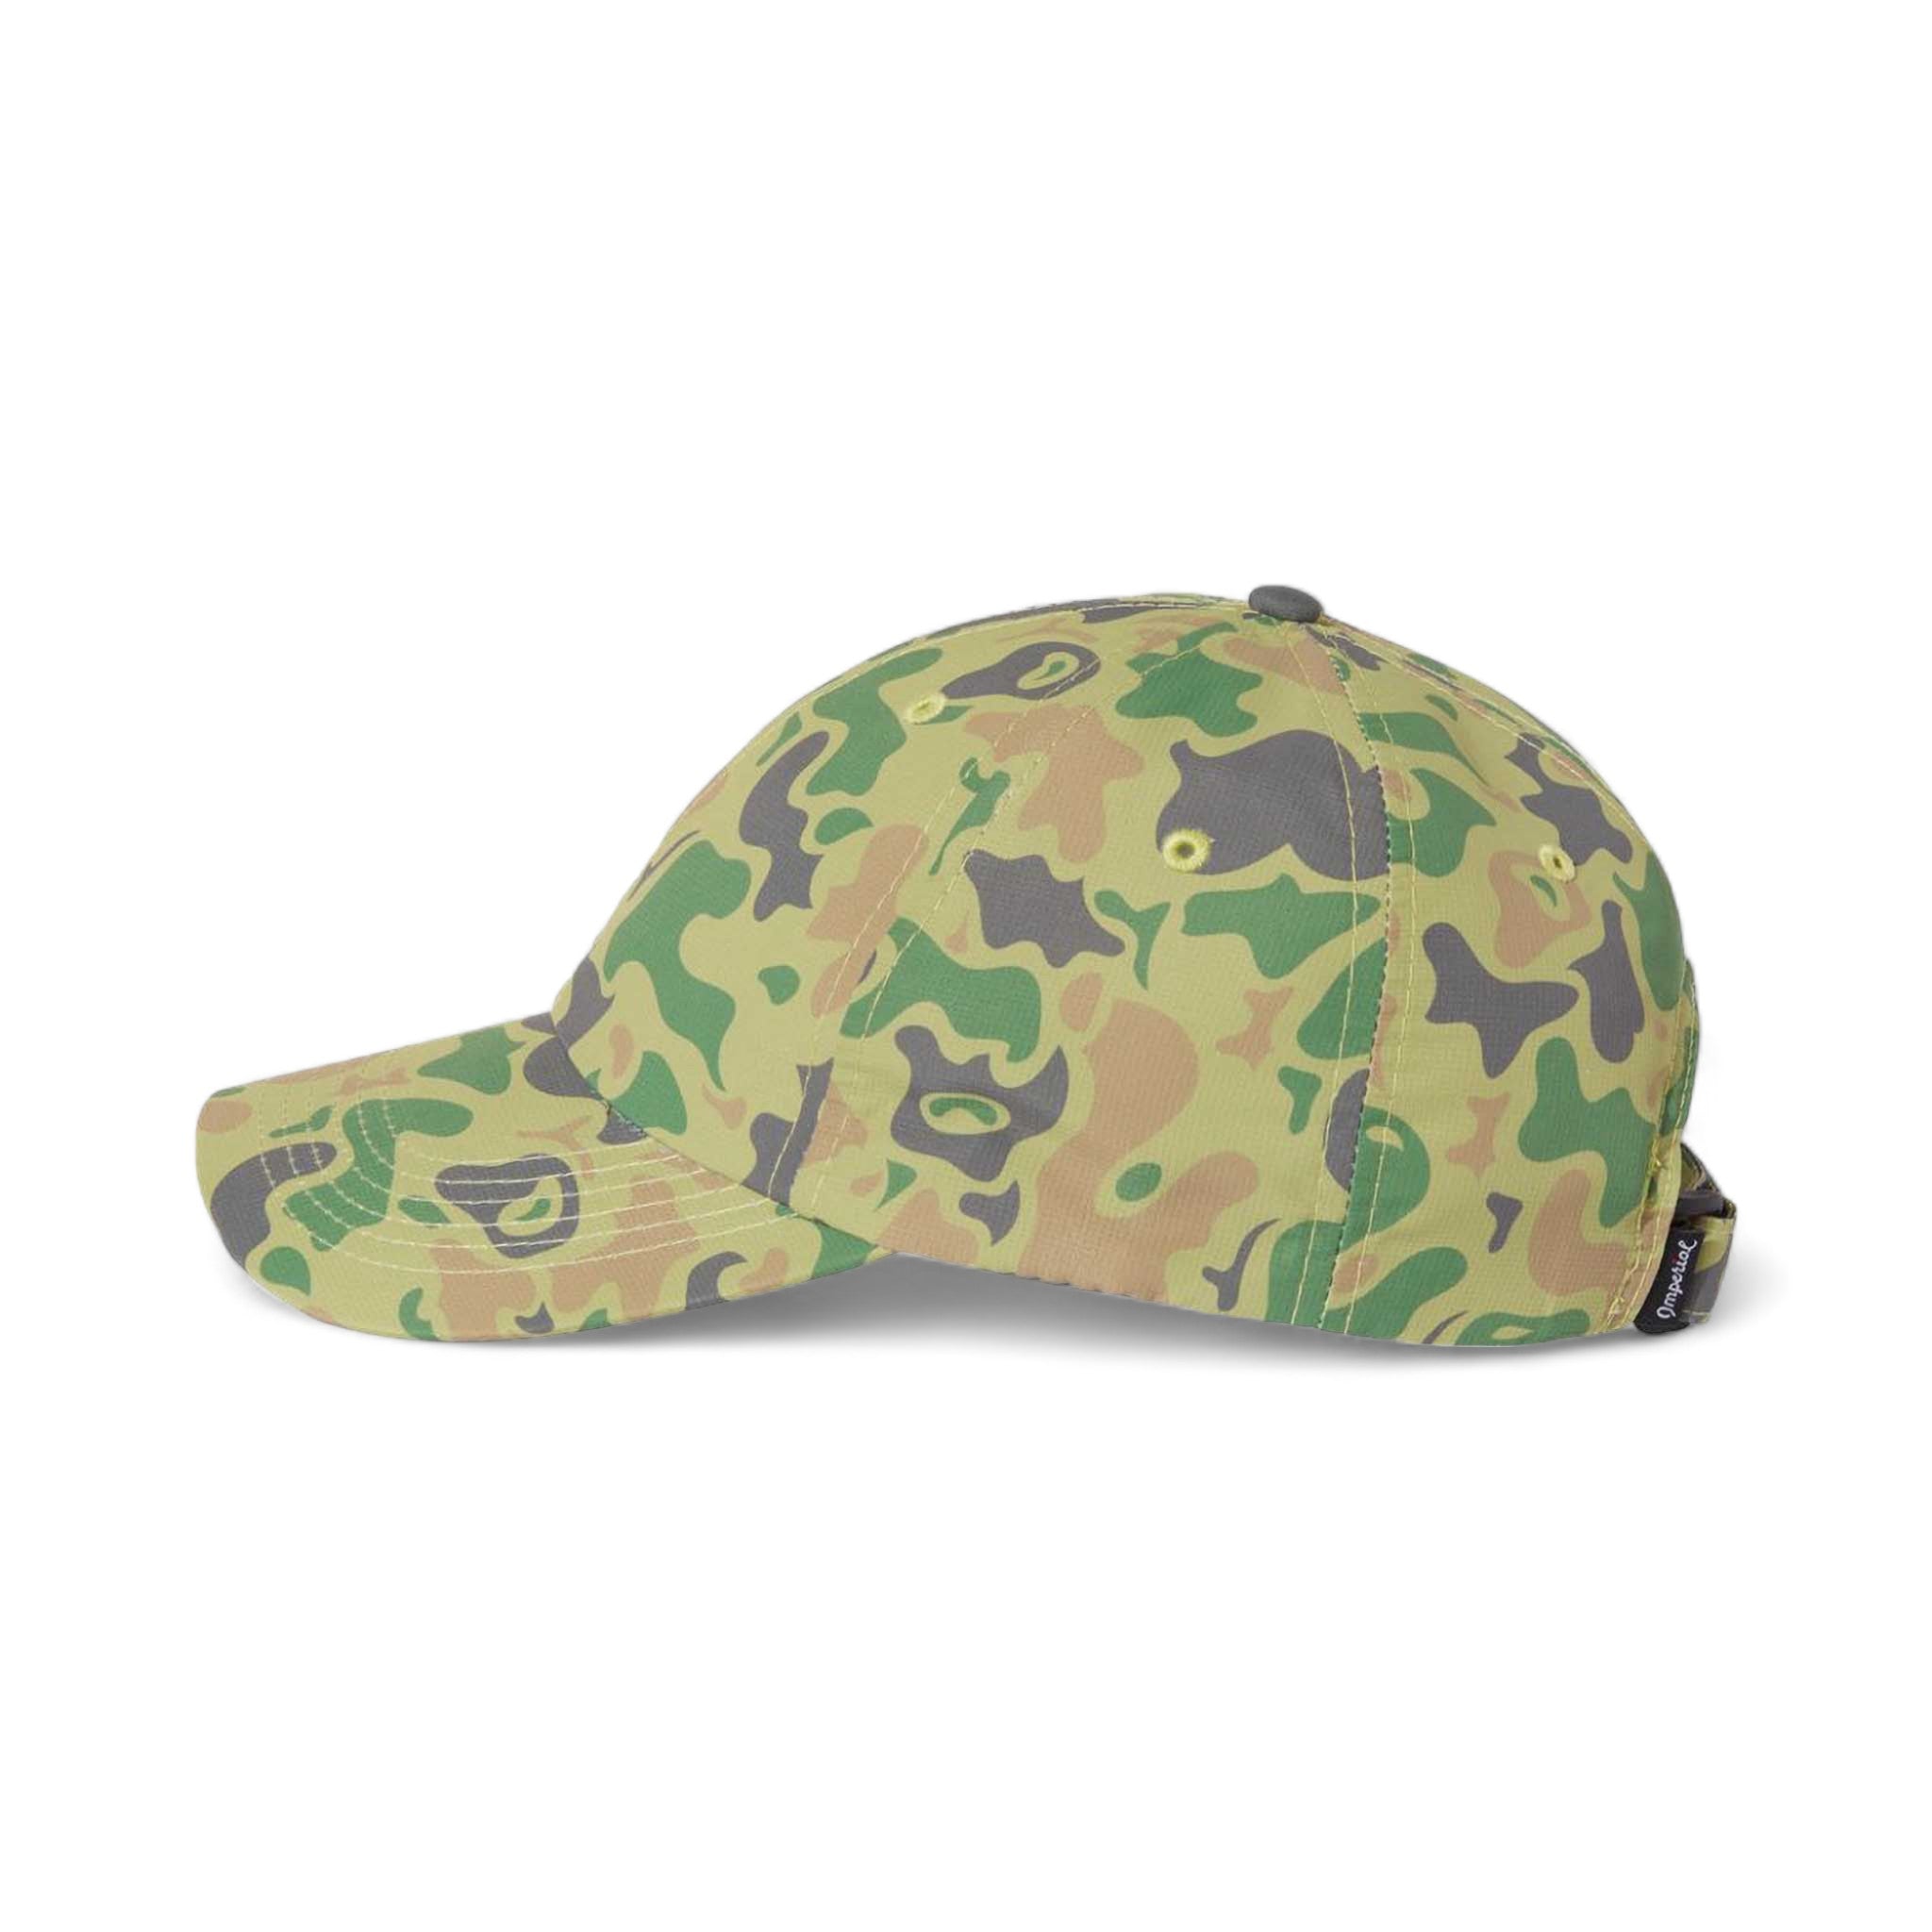 Side view of Imperial X210R custom hat in green duck camo